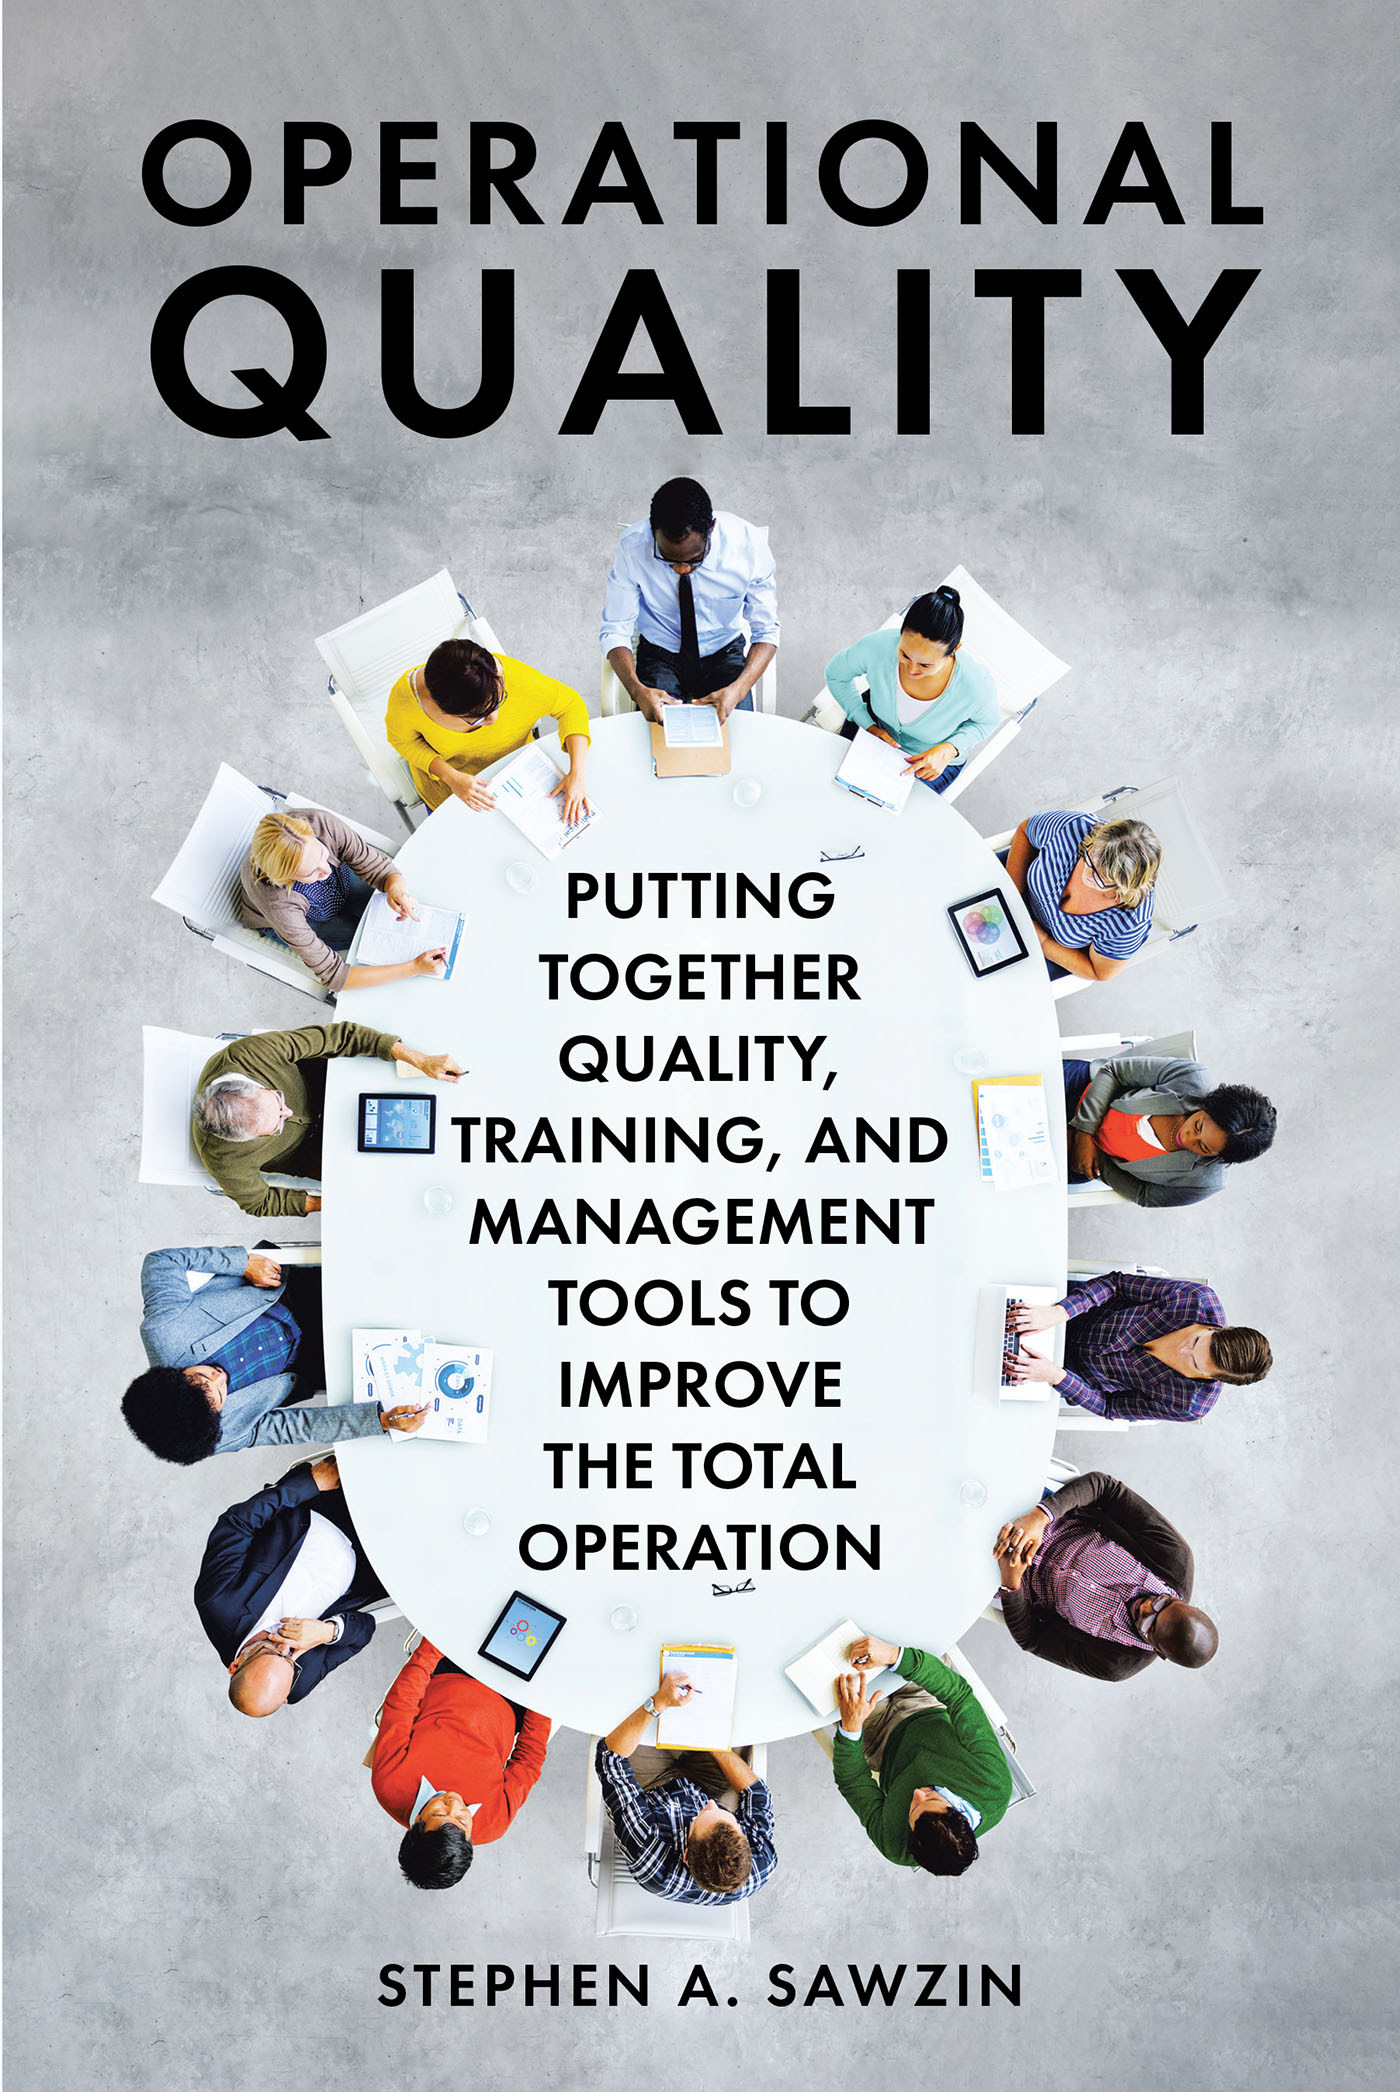 Stephen A. Sawzin’s Newly Released "Operational Quality" is an Engaging Resource for Developing Impactful Management Skills